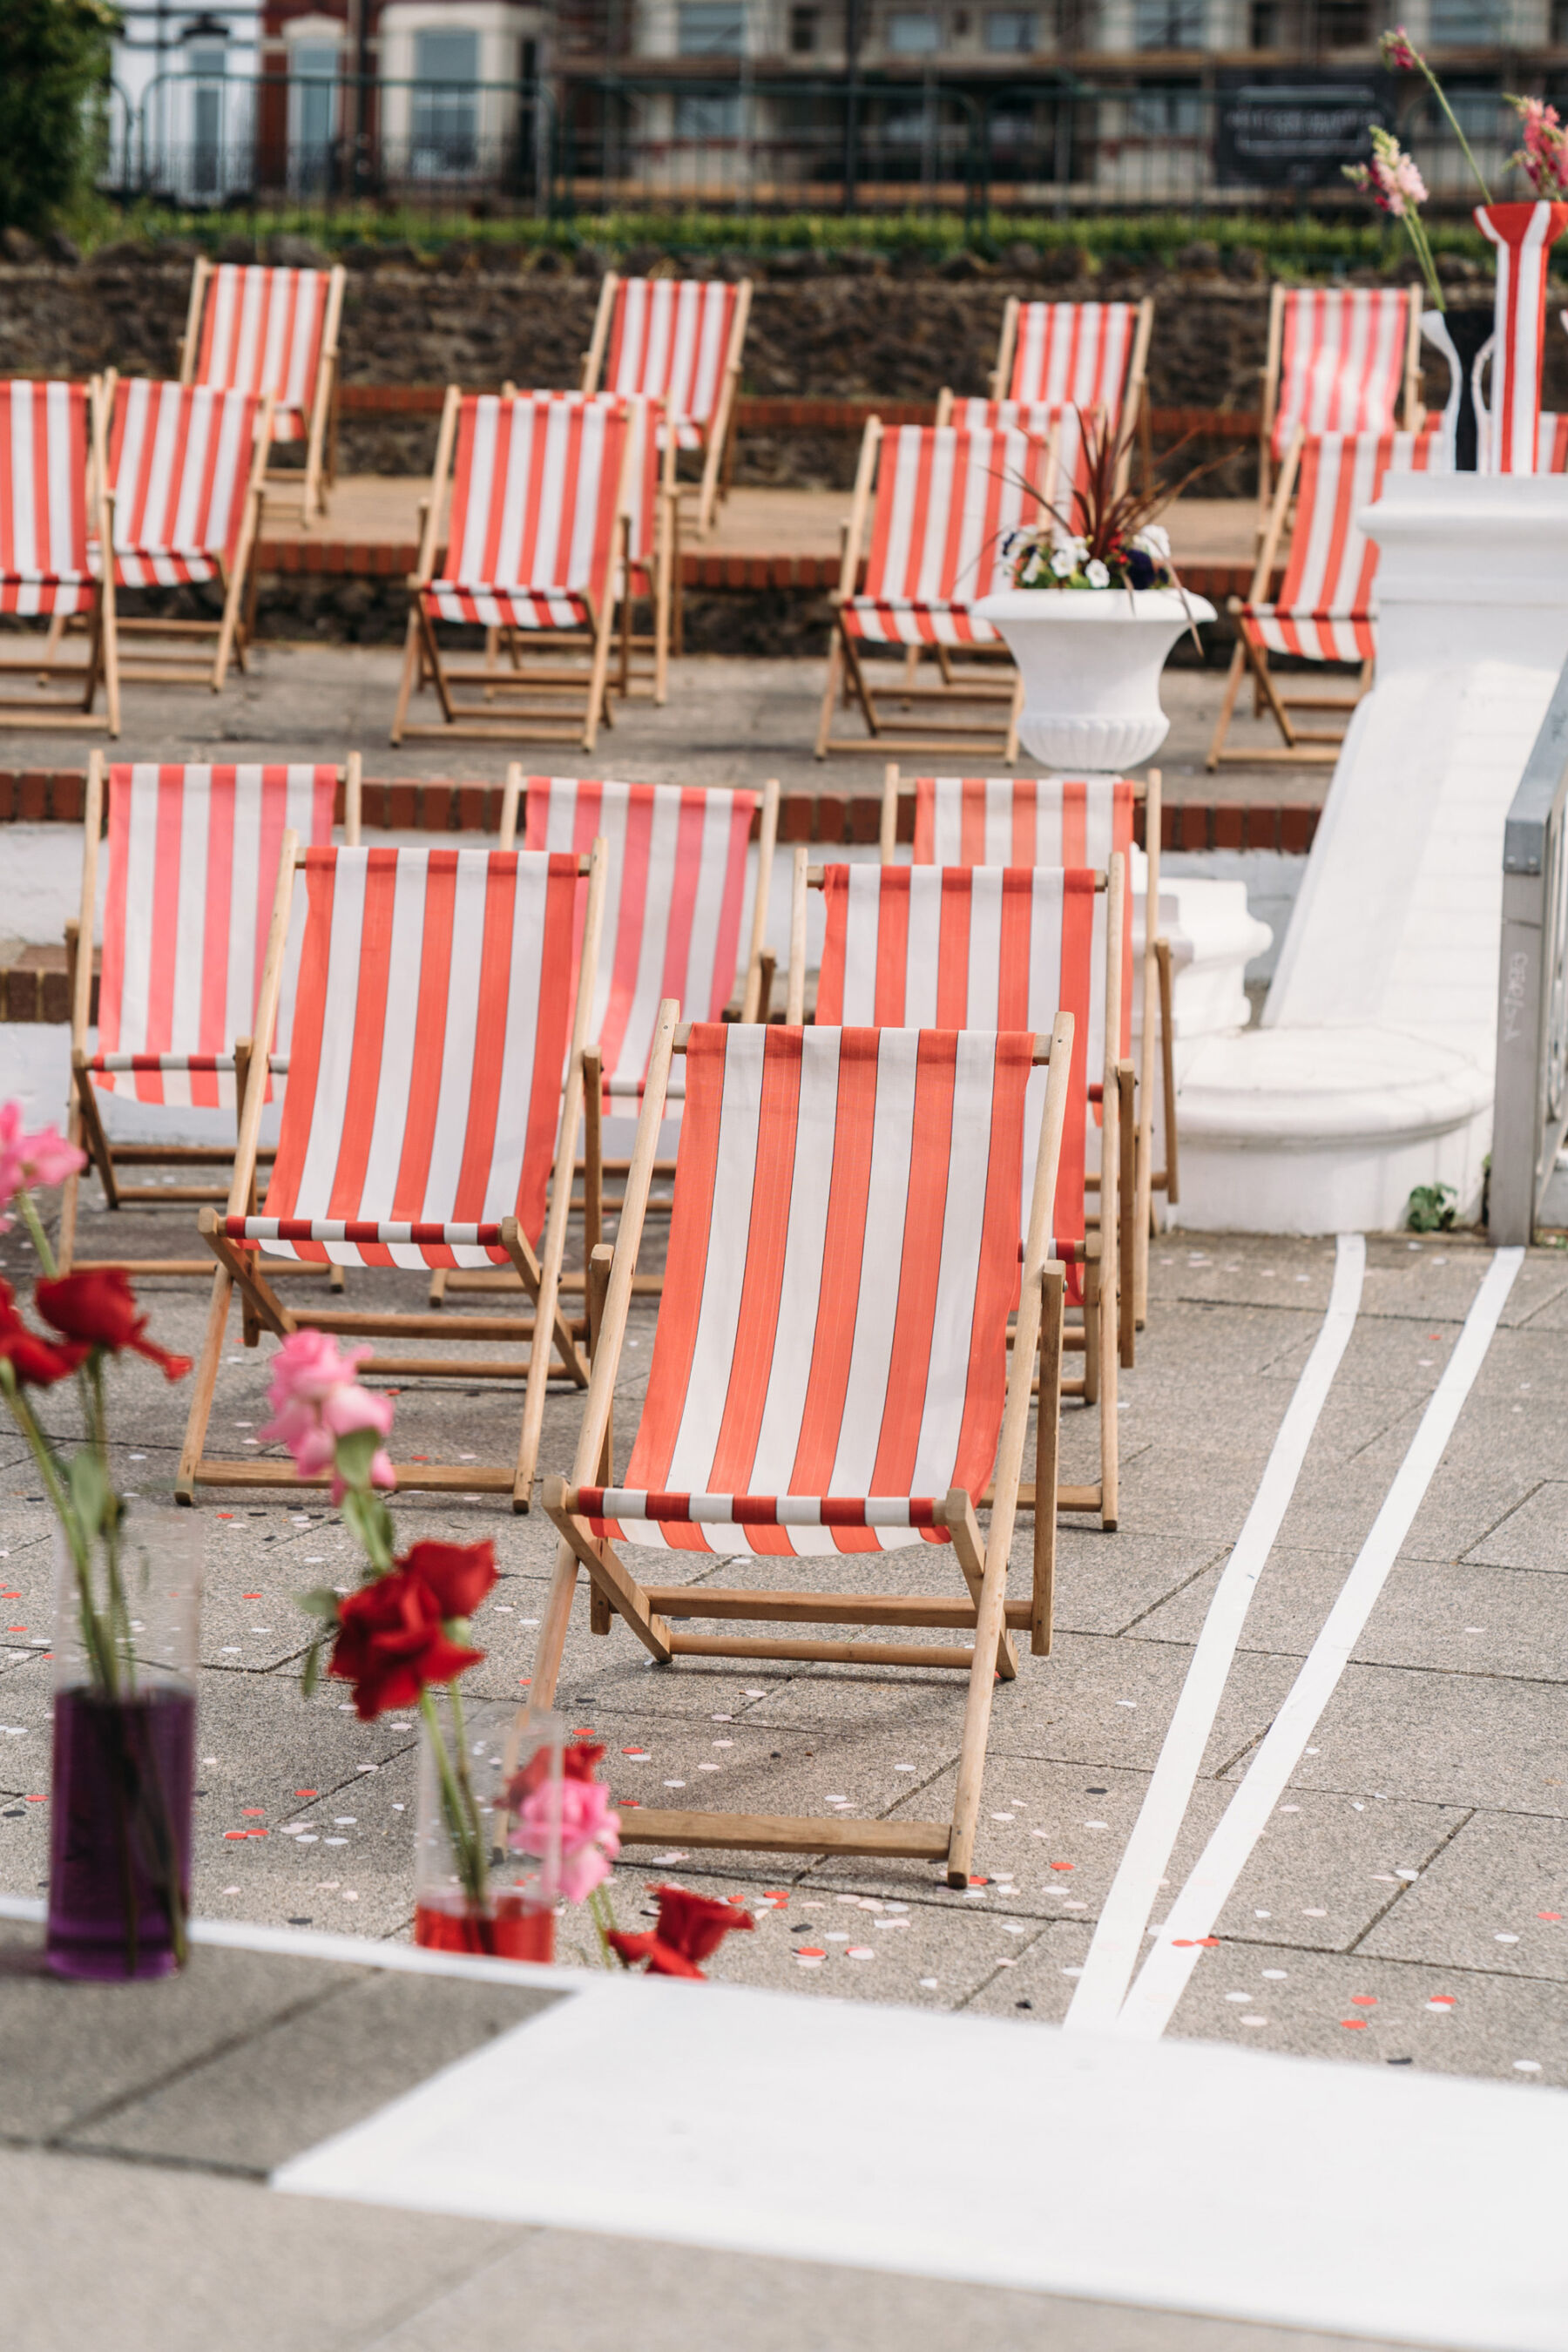 Traditional stripy deckchairs as wedding ceremony seating. Joanna Bongard Photography.